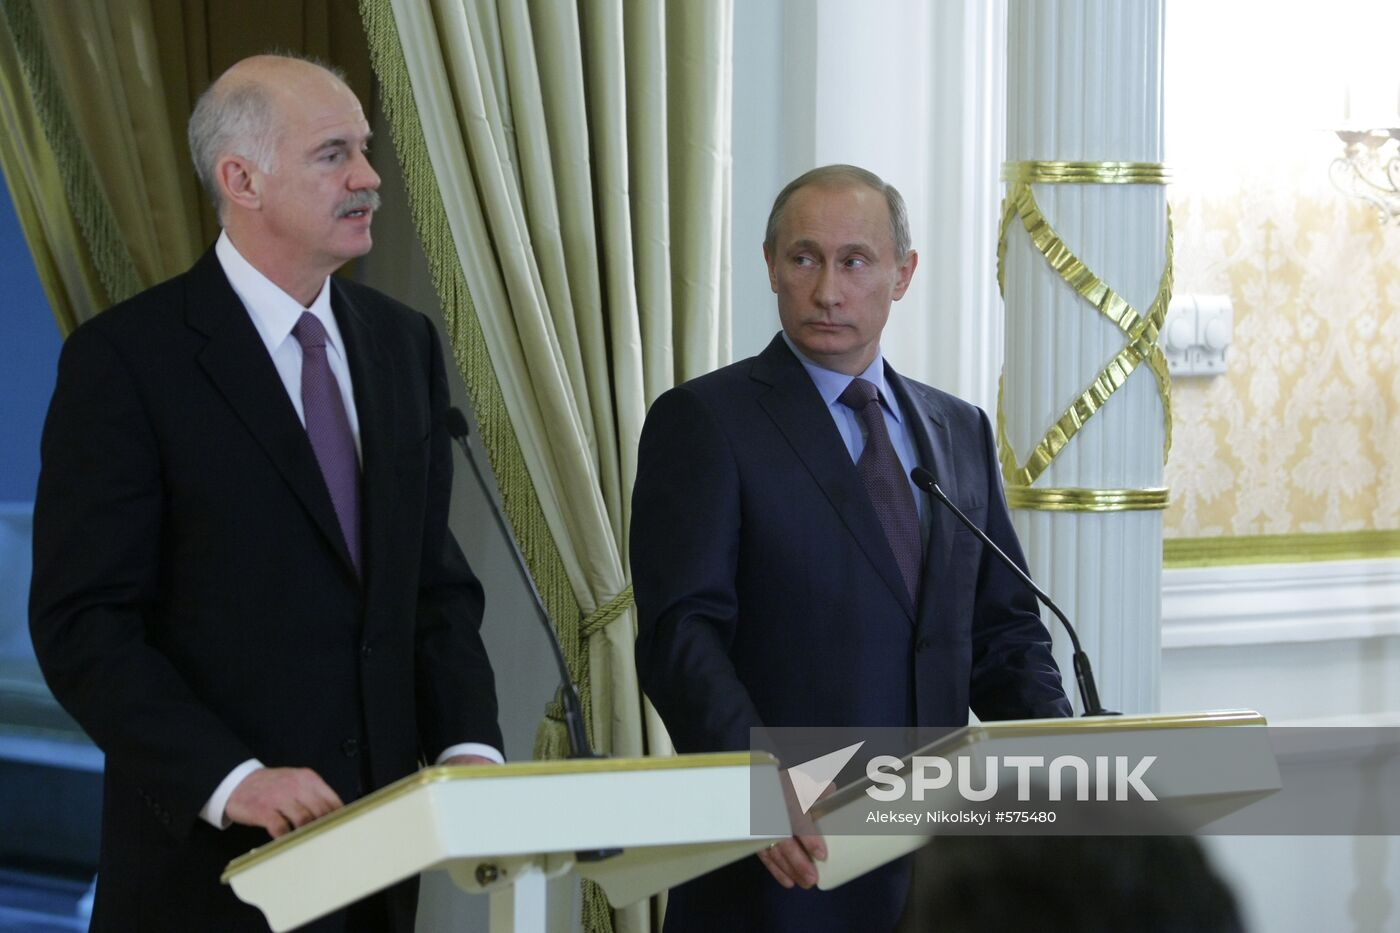 News conference with Vladimir Putin and George Papandreou